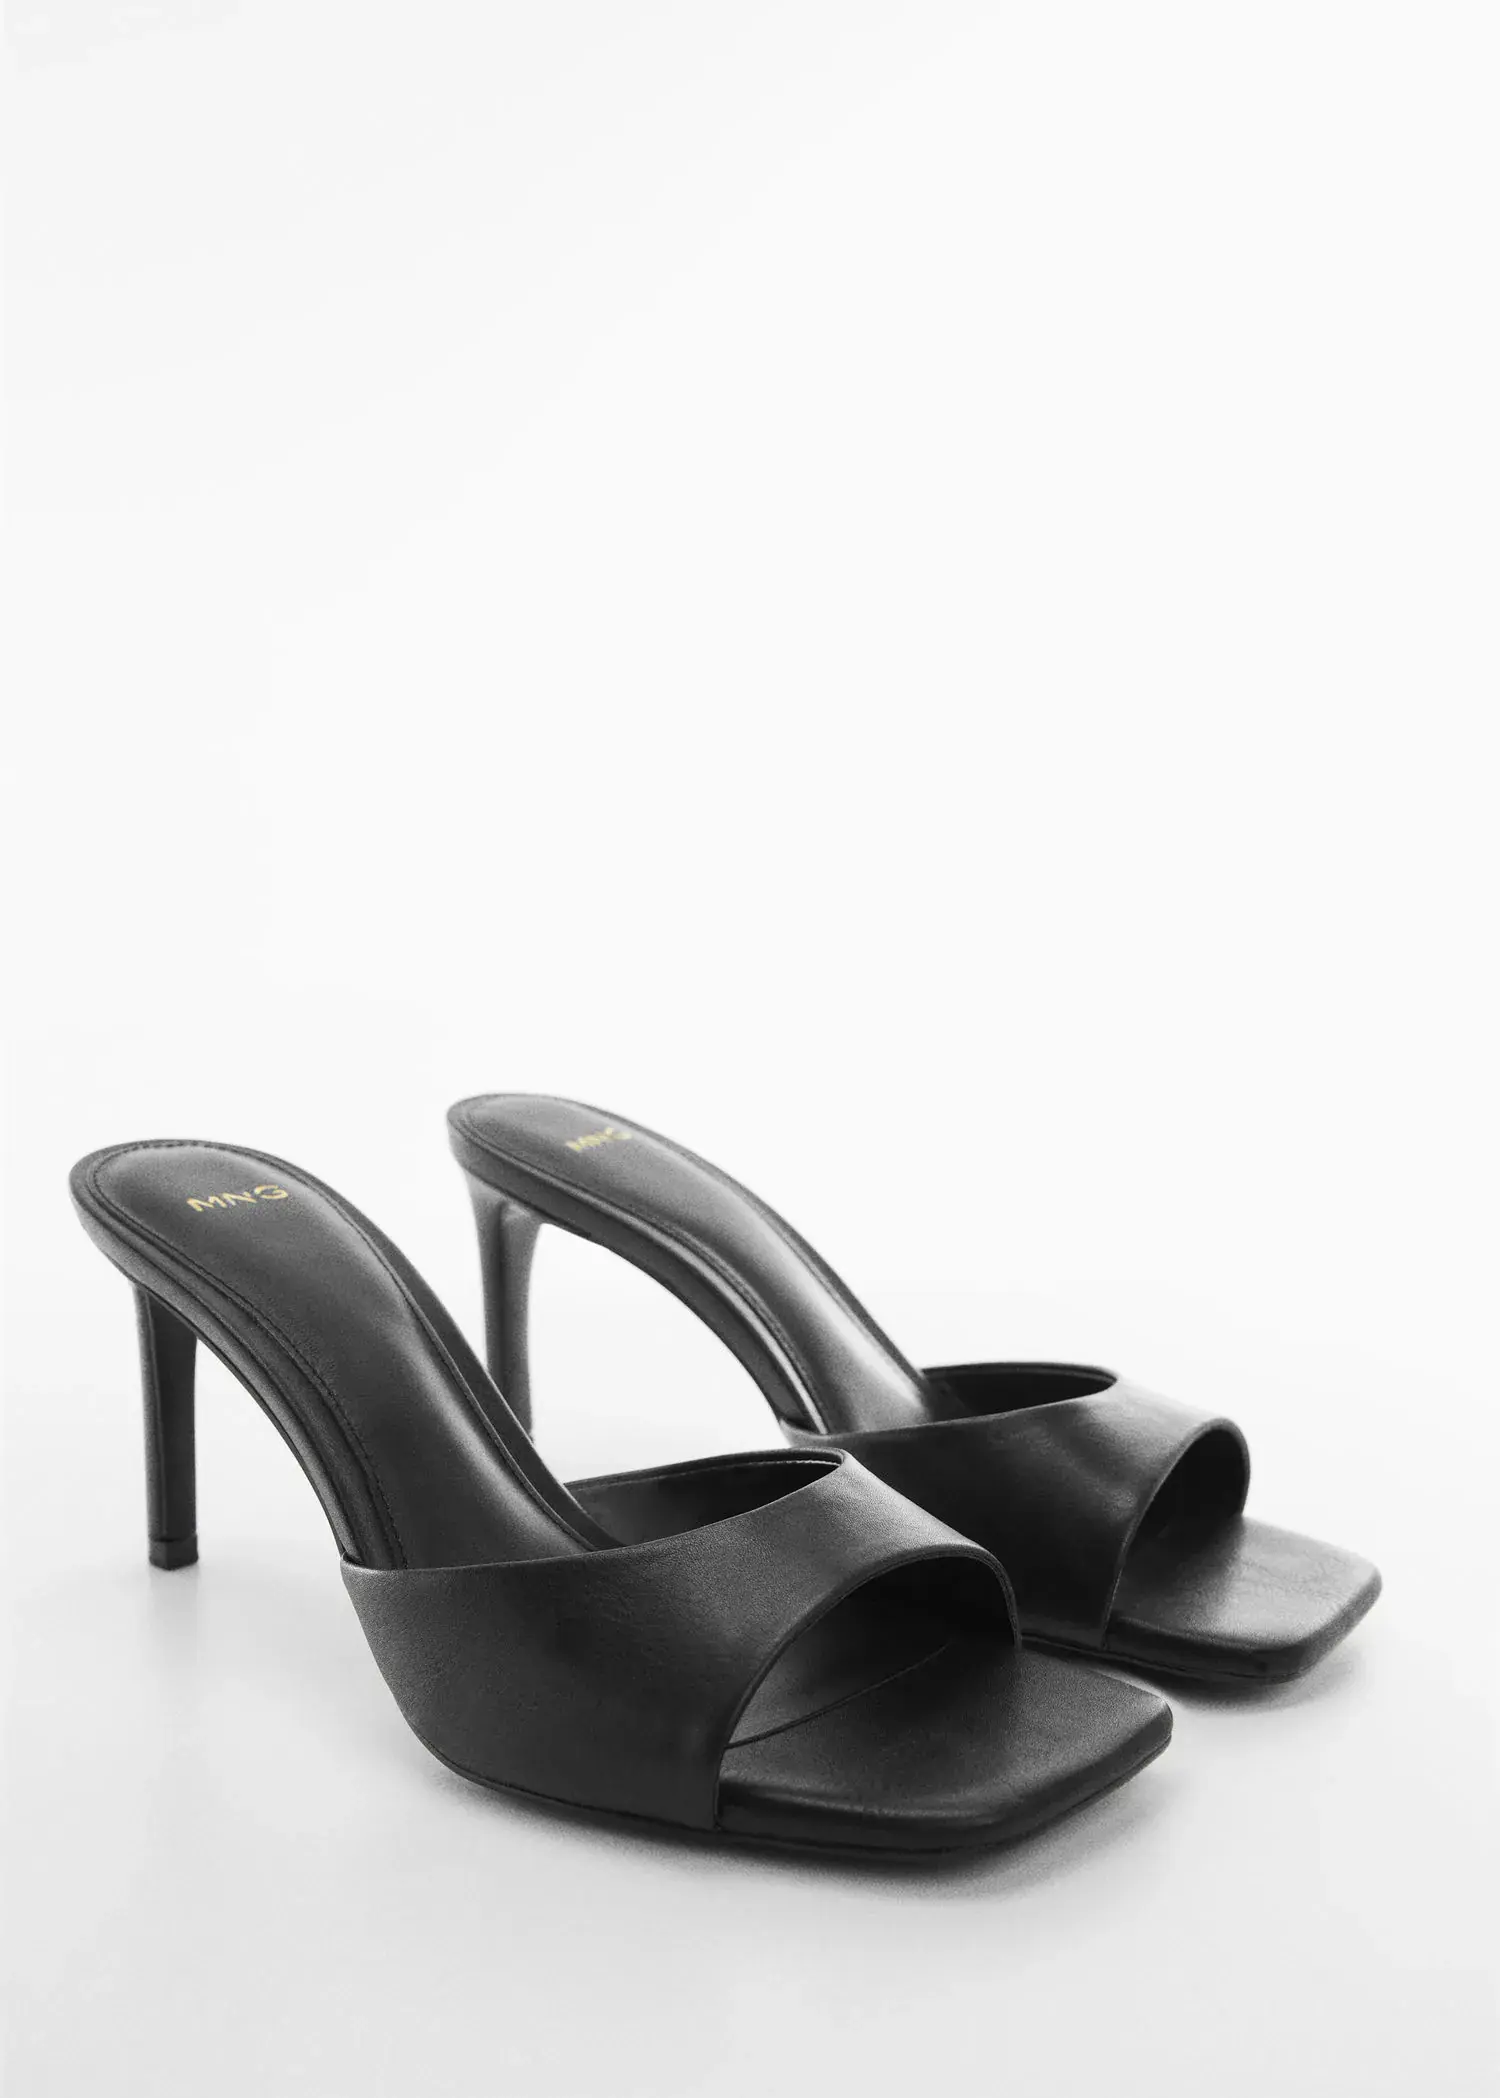 Mango Strappy heeled sandals. a pair of black high heeled shoes on a white surface. 